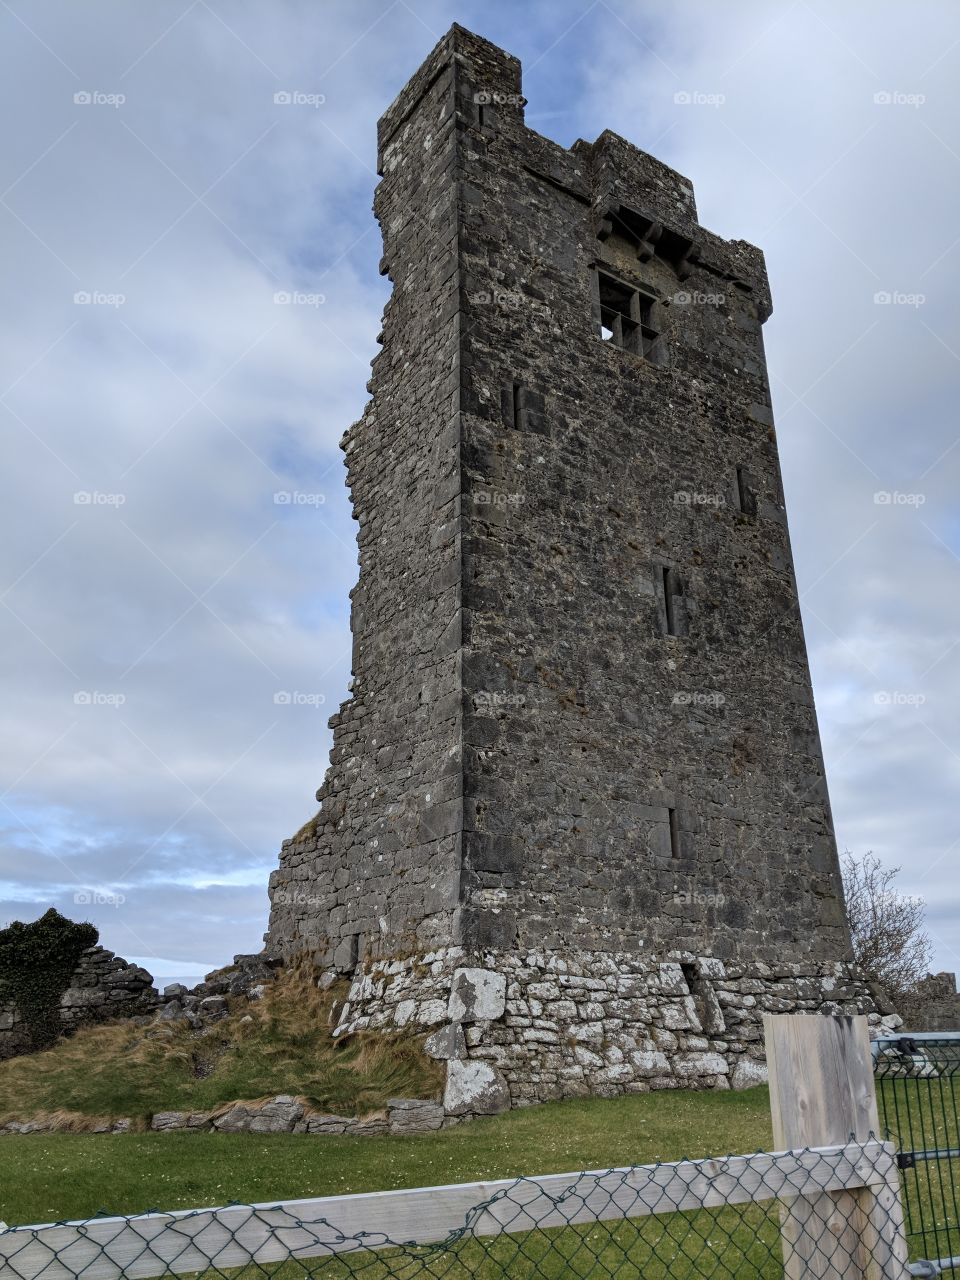 Tower in ruin